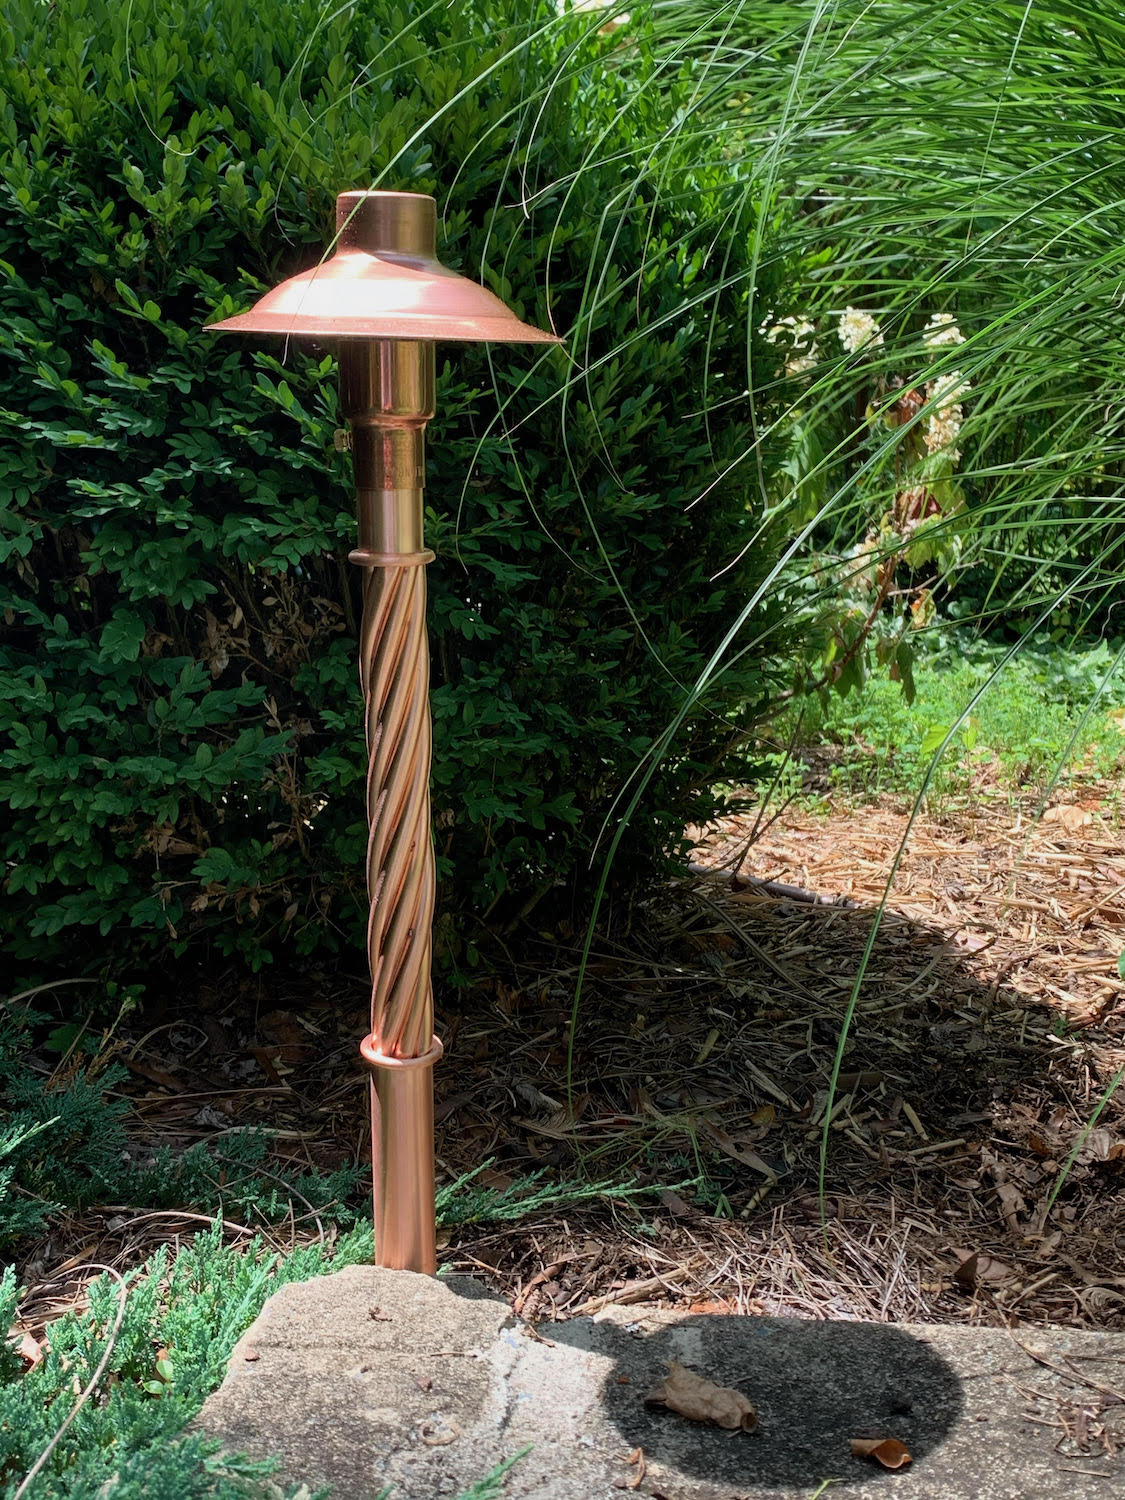 CopperMoon CM.730-10 12V Copper 9" Path Light Top, 20" Twisted Rope Stem With Stake